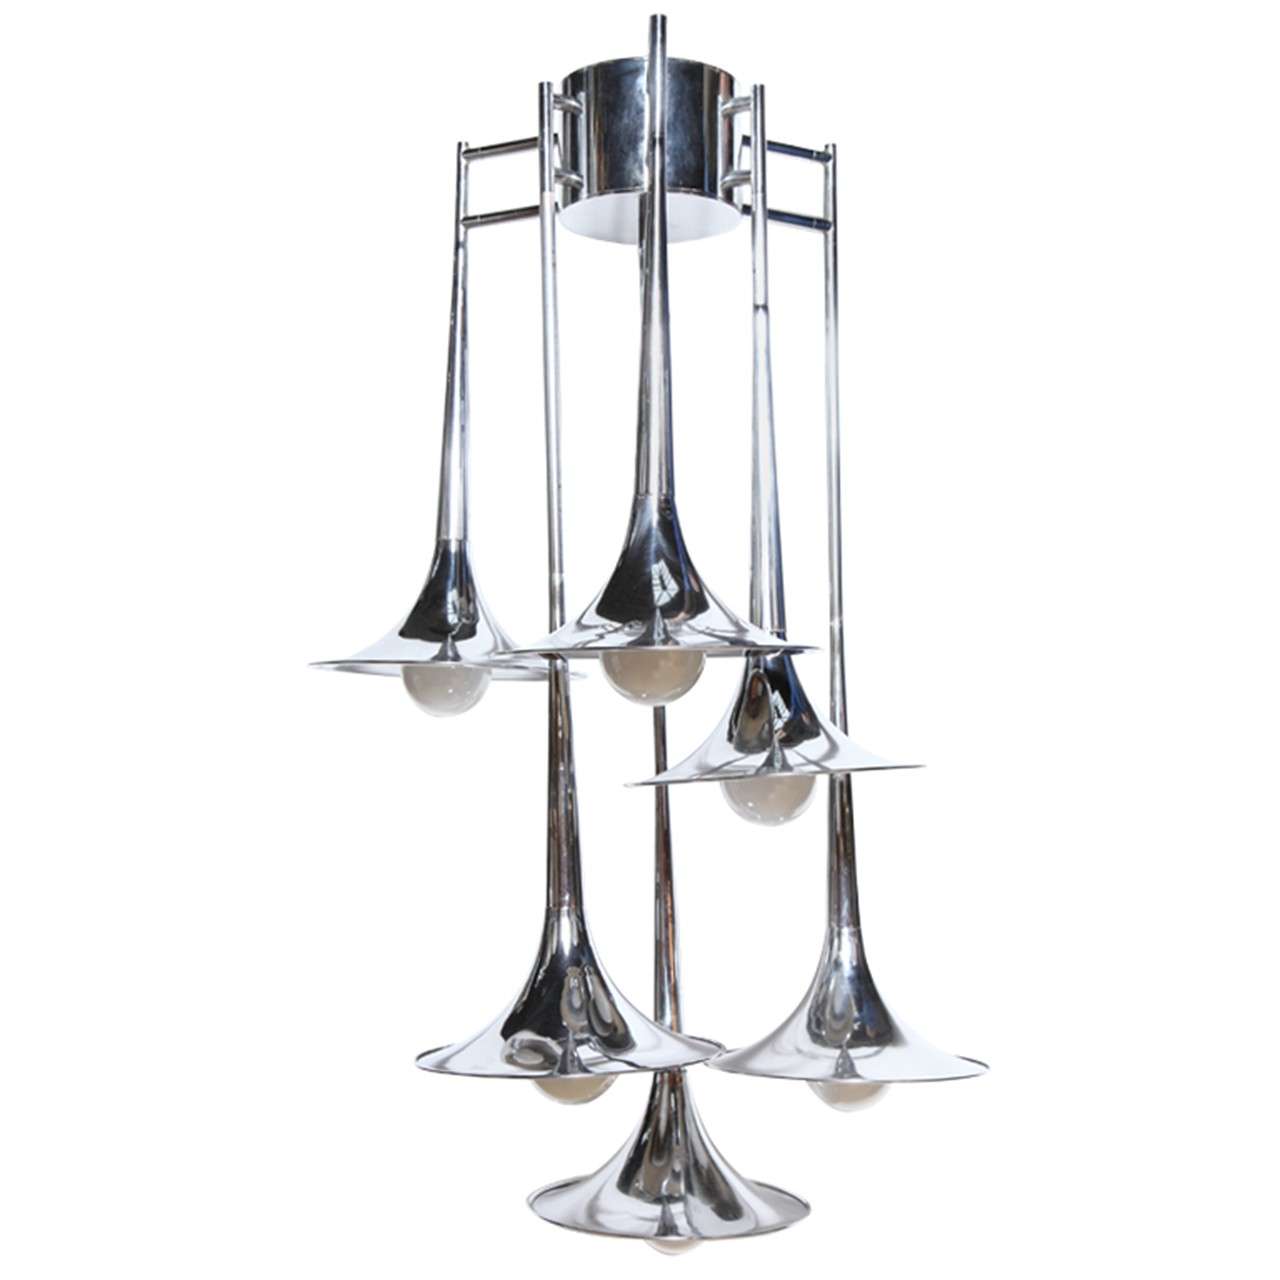 Reggiani Italy Tiered Six Arm "Horn" Chrome Ceiling Lamp, 1970s For Sale